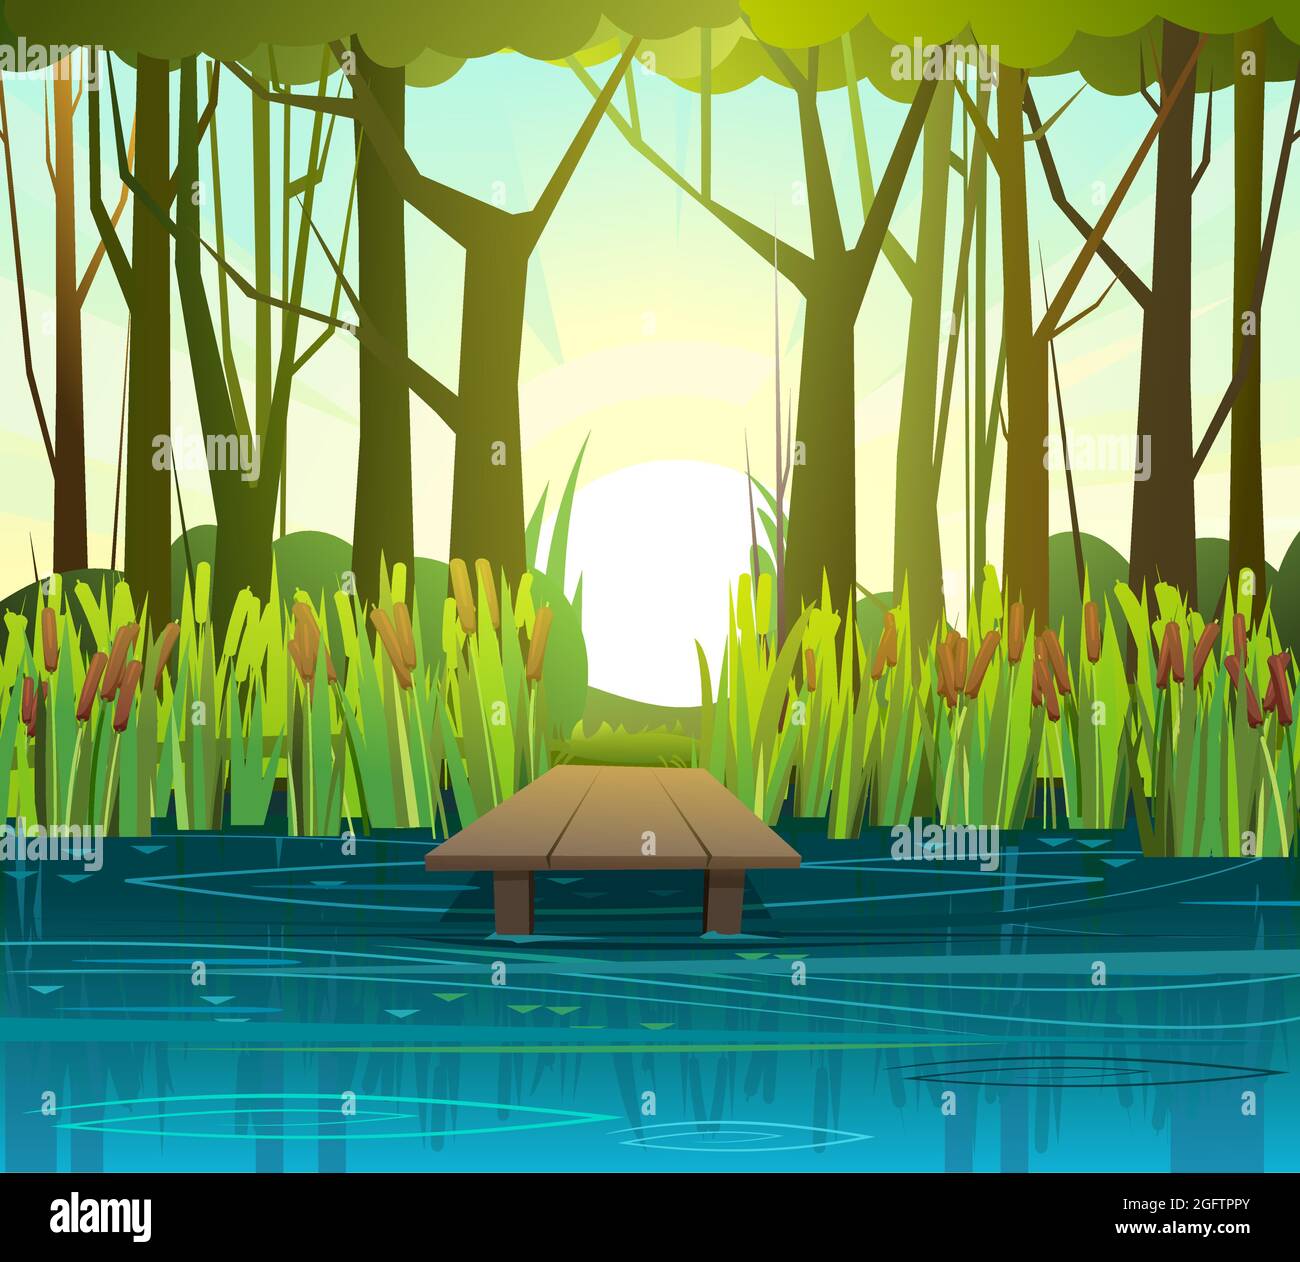 Summer forest landscape with a pond. Bank of a river or lake. Morning sunrise. Trees and thickets. Swamp illustration. Flat style. Water waves. Fishin Stock Vector